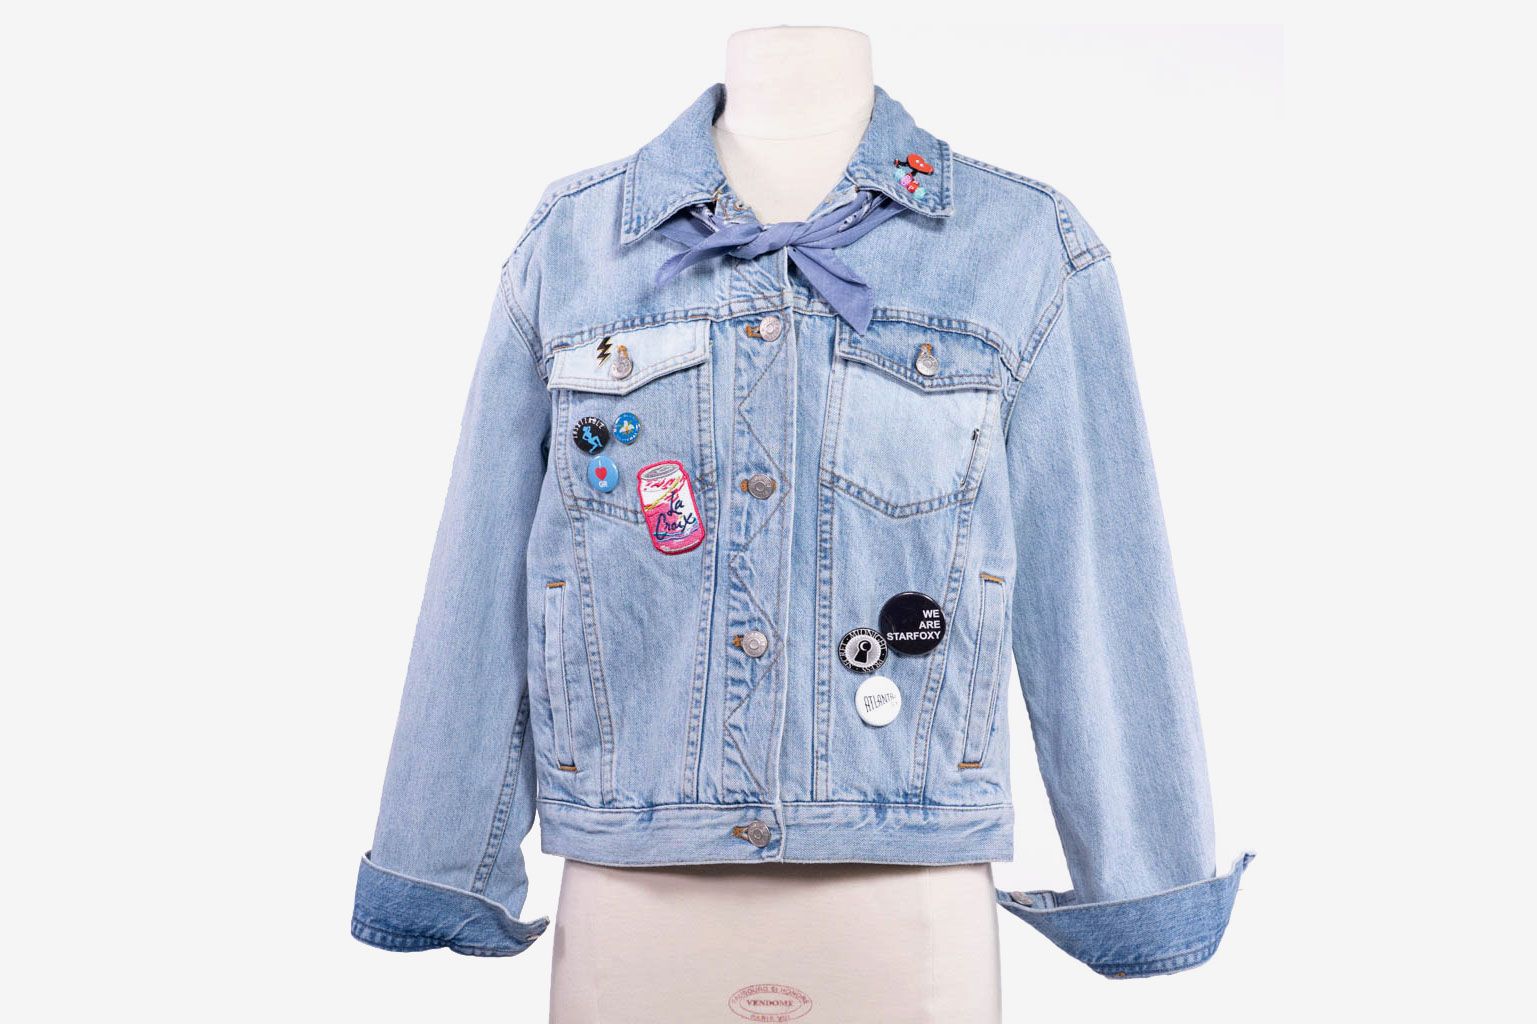 Buy Debby Ryan's Denim Jacket And Pin Collection